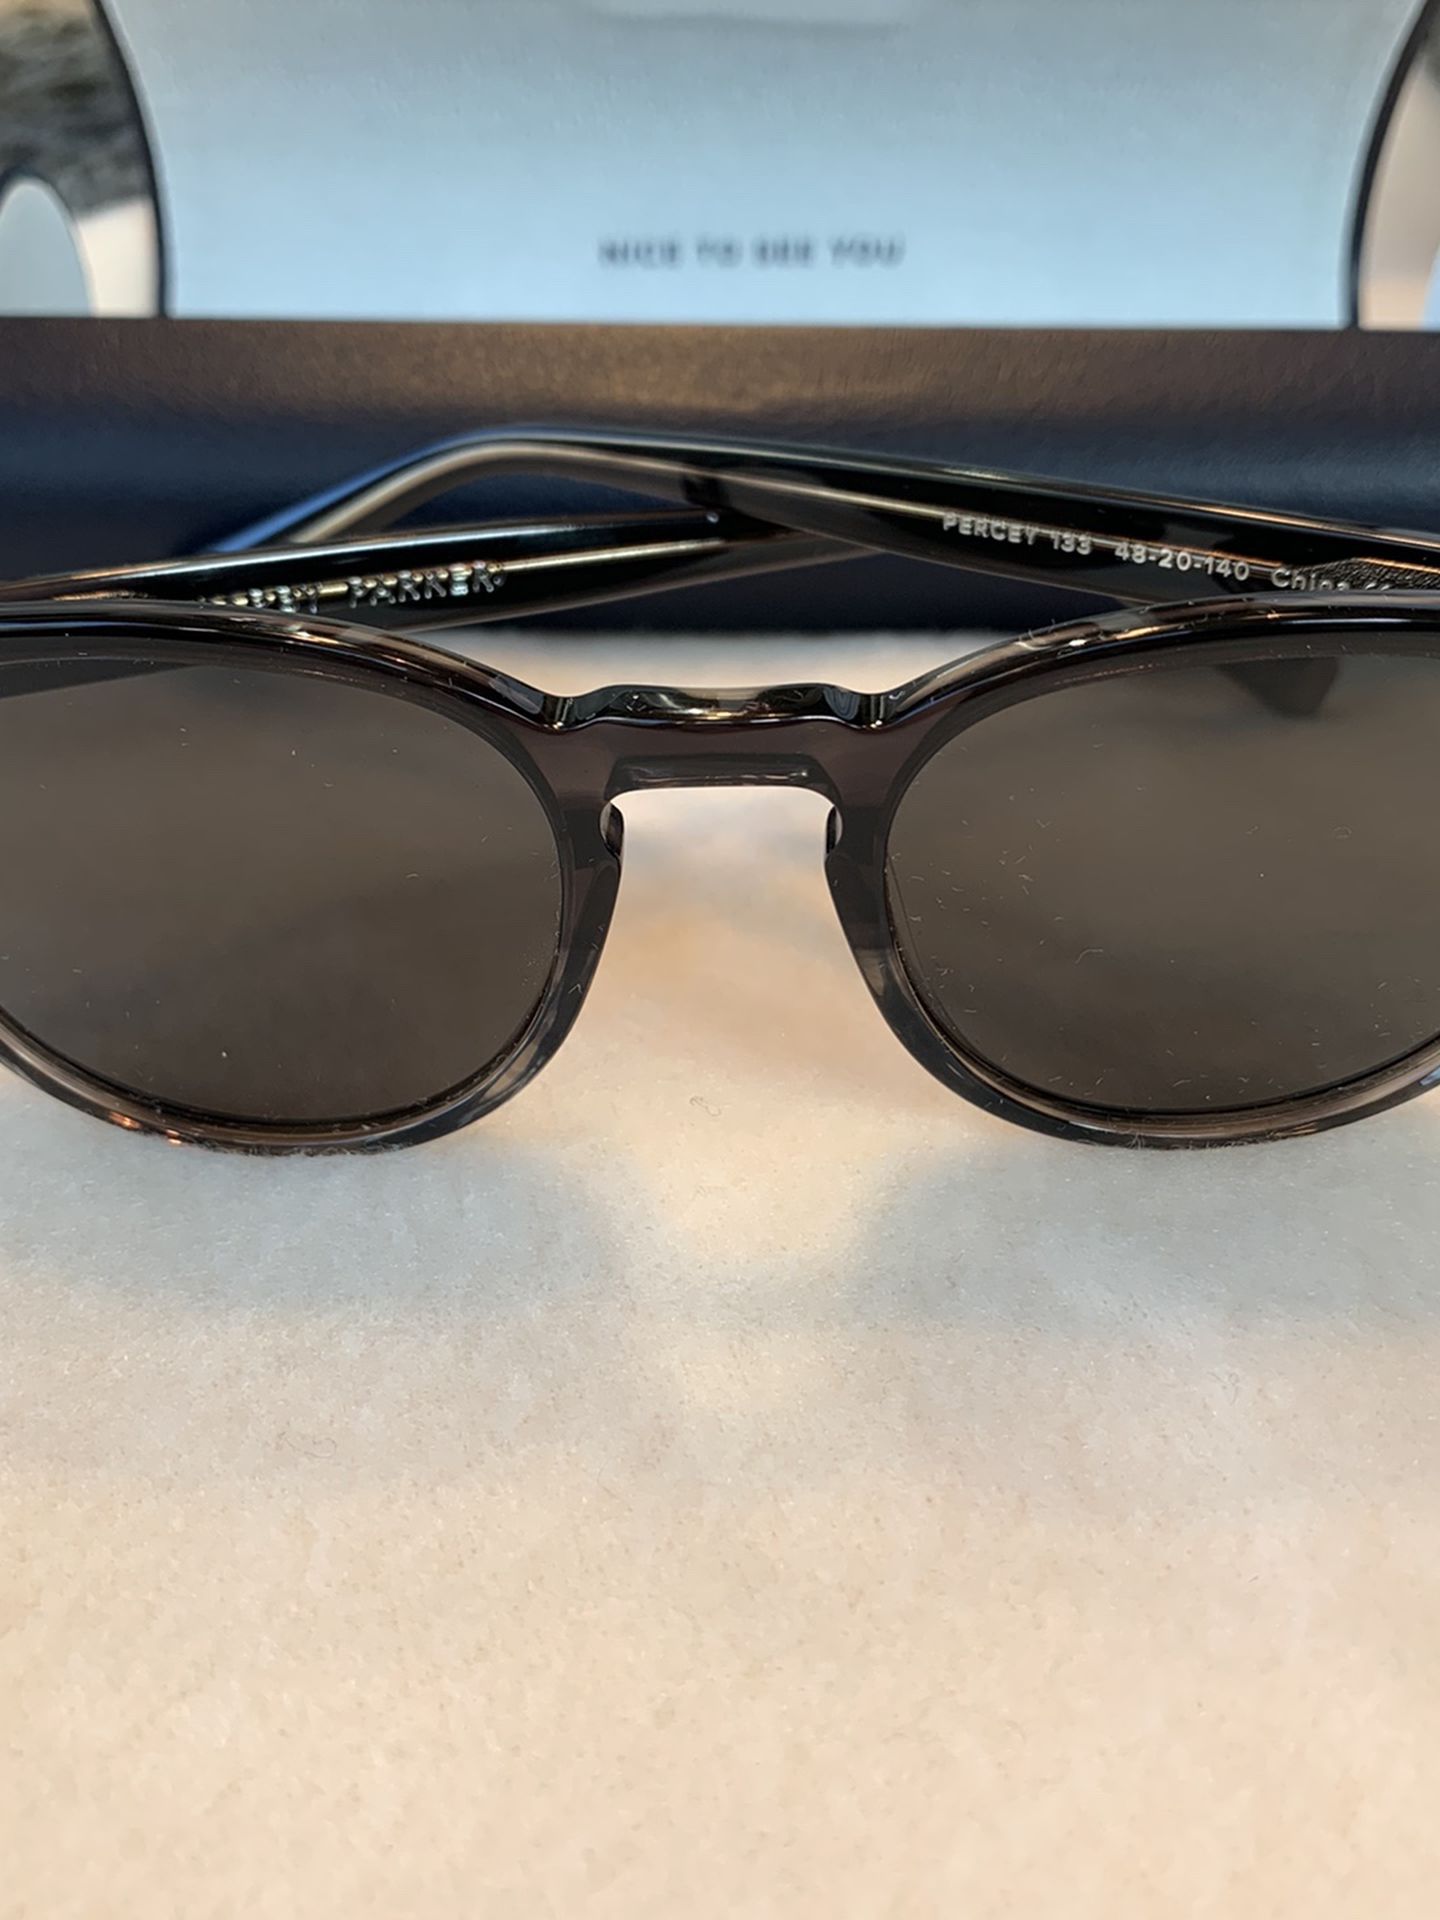 Warby Parker- percey - sunglasses- Like New!